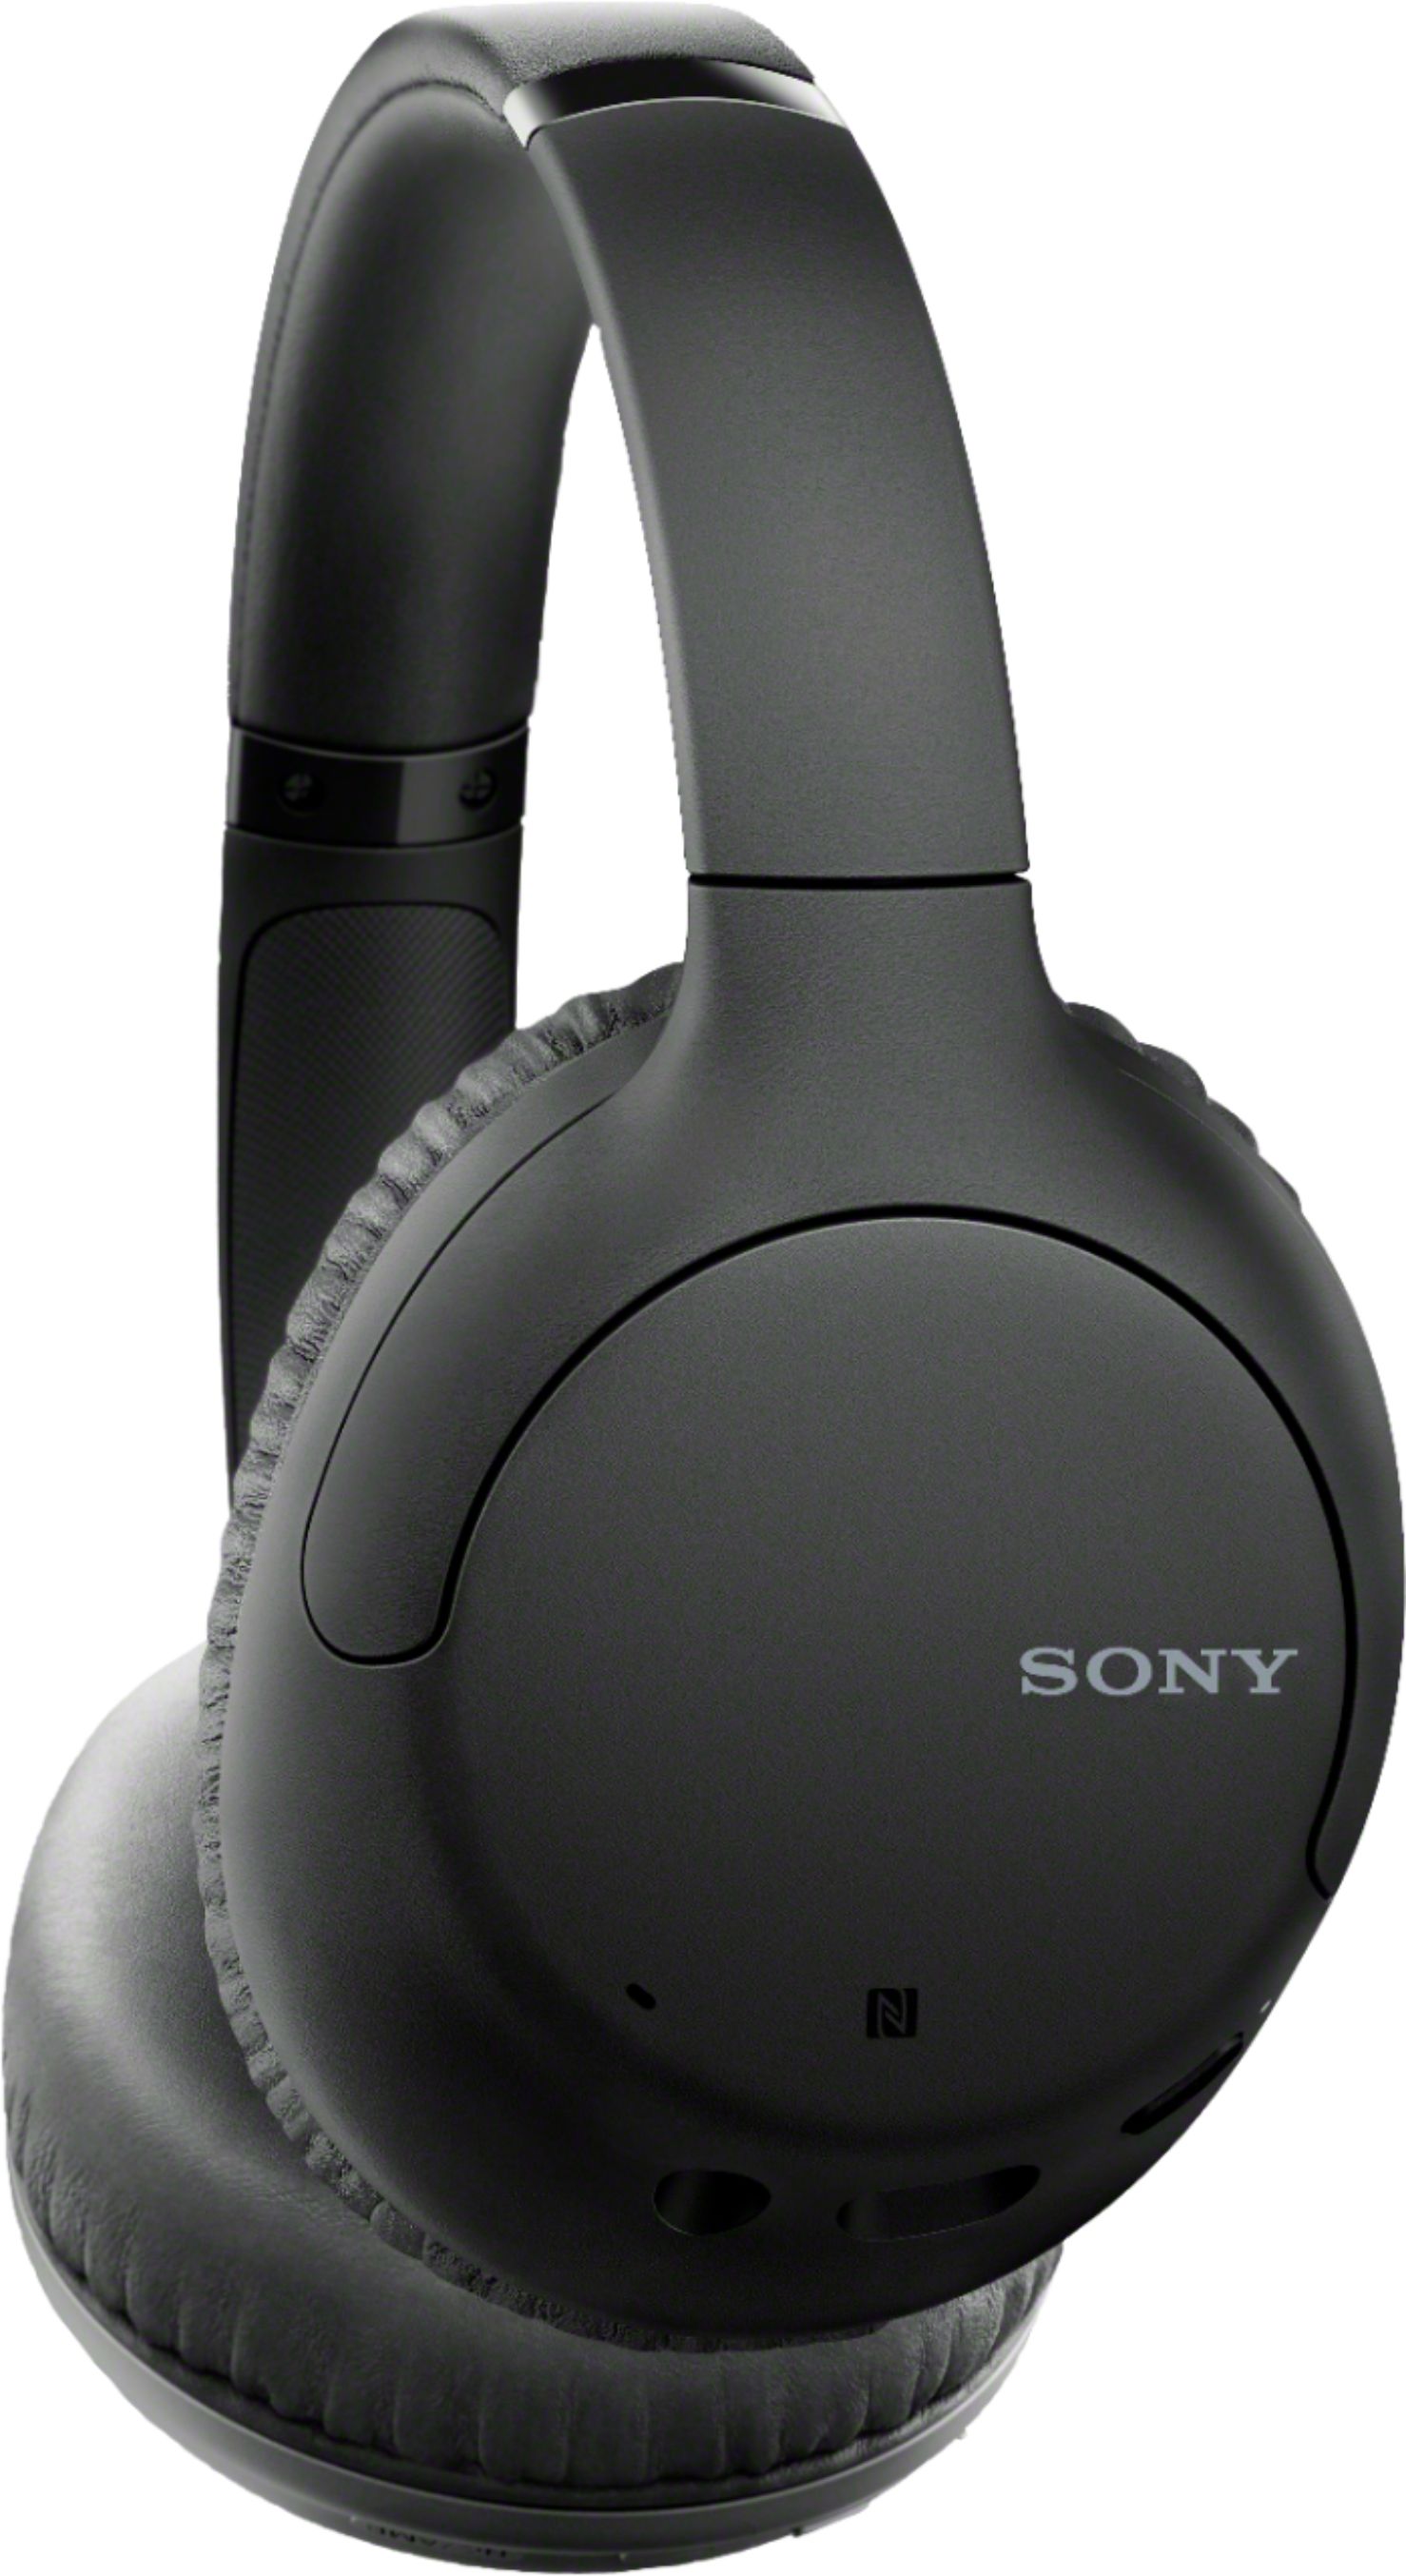 Sony WH-CH710N/B Noise Cancelling Headphones $42.48